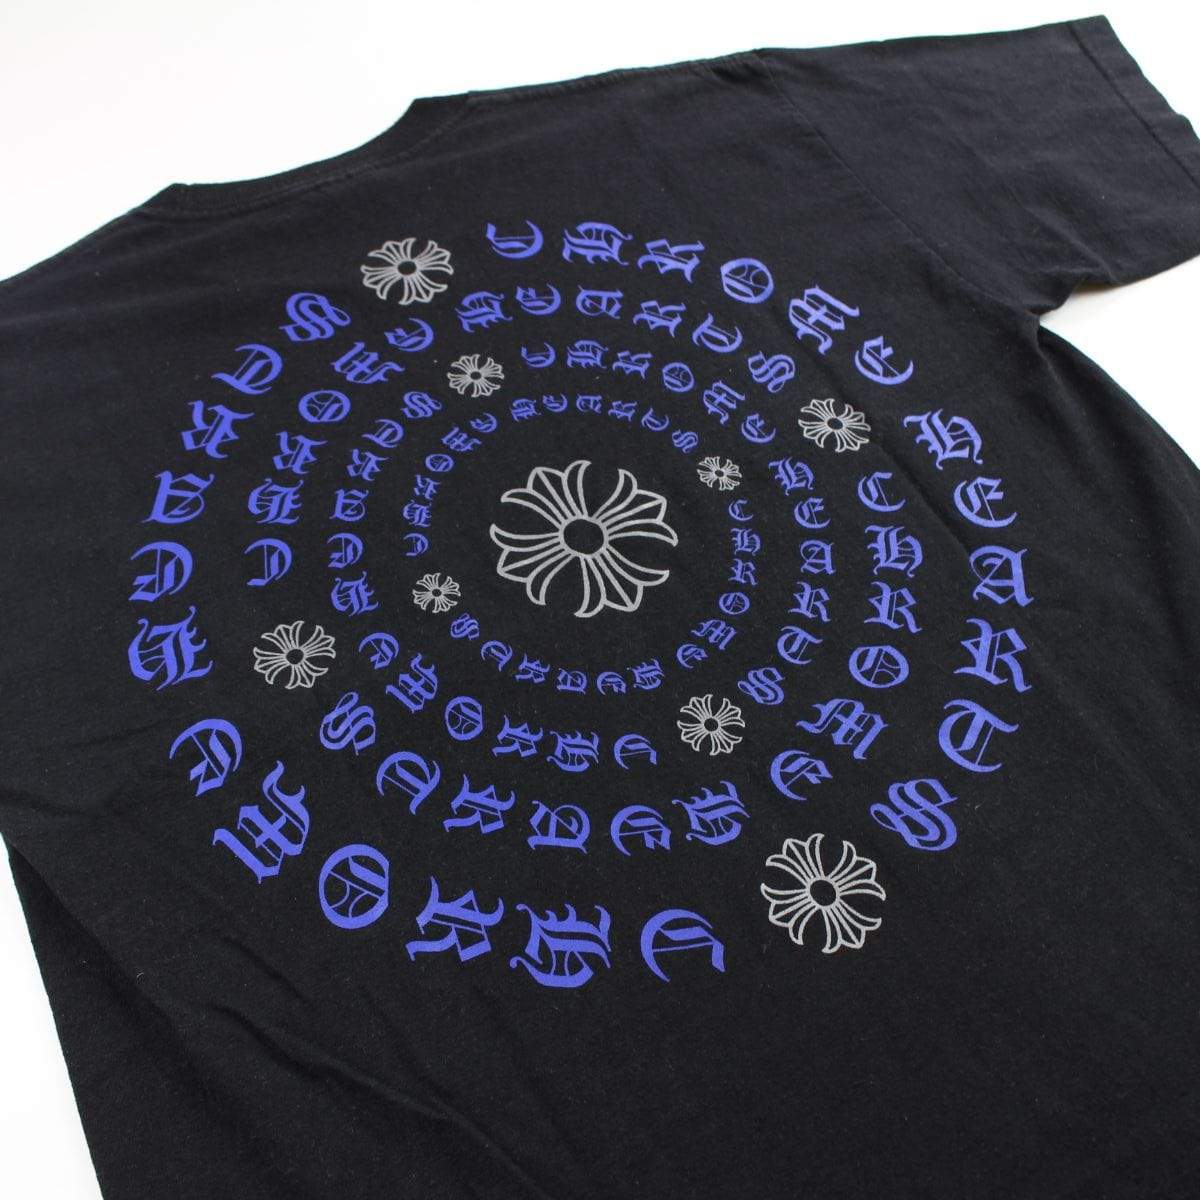 chrome hearts blue text crosses tee black - SaruGeneral